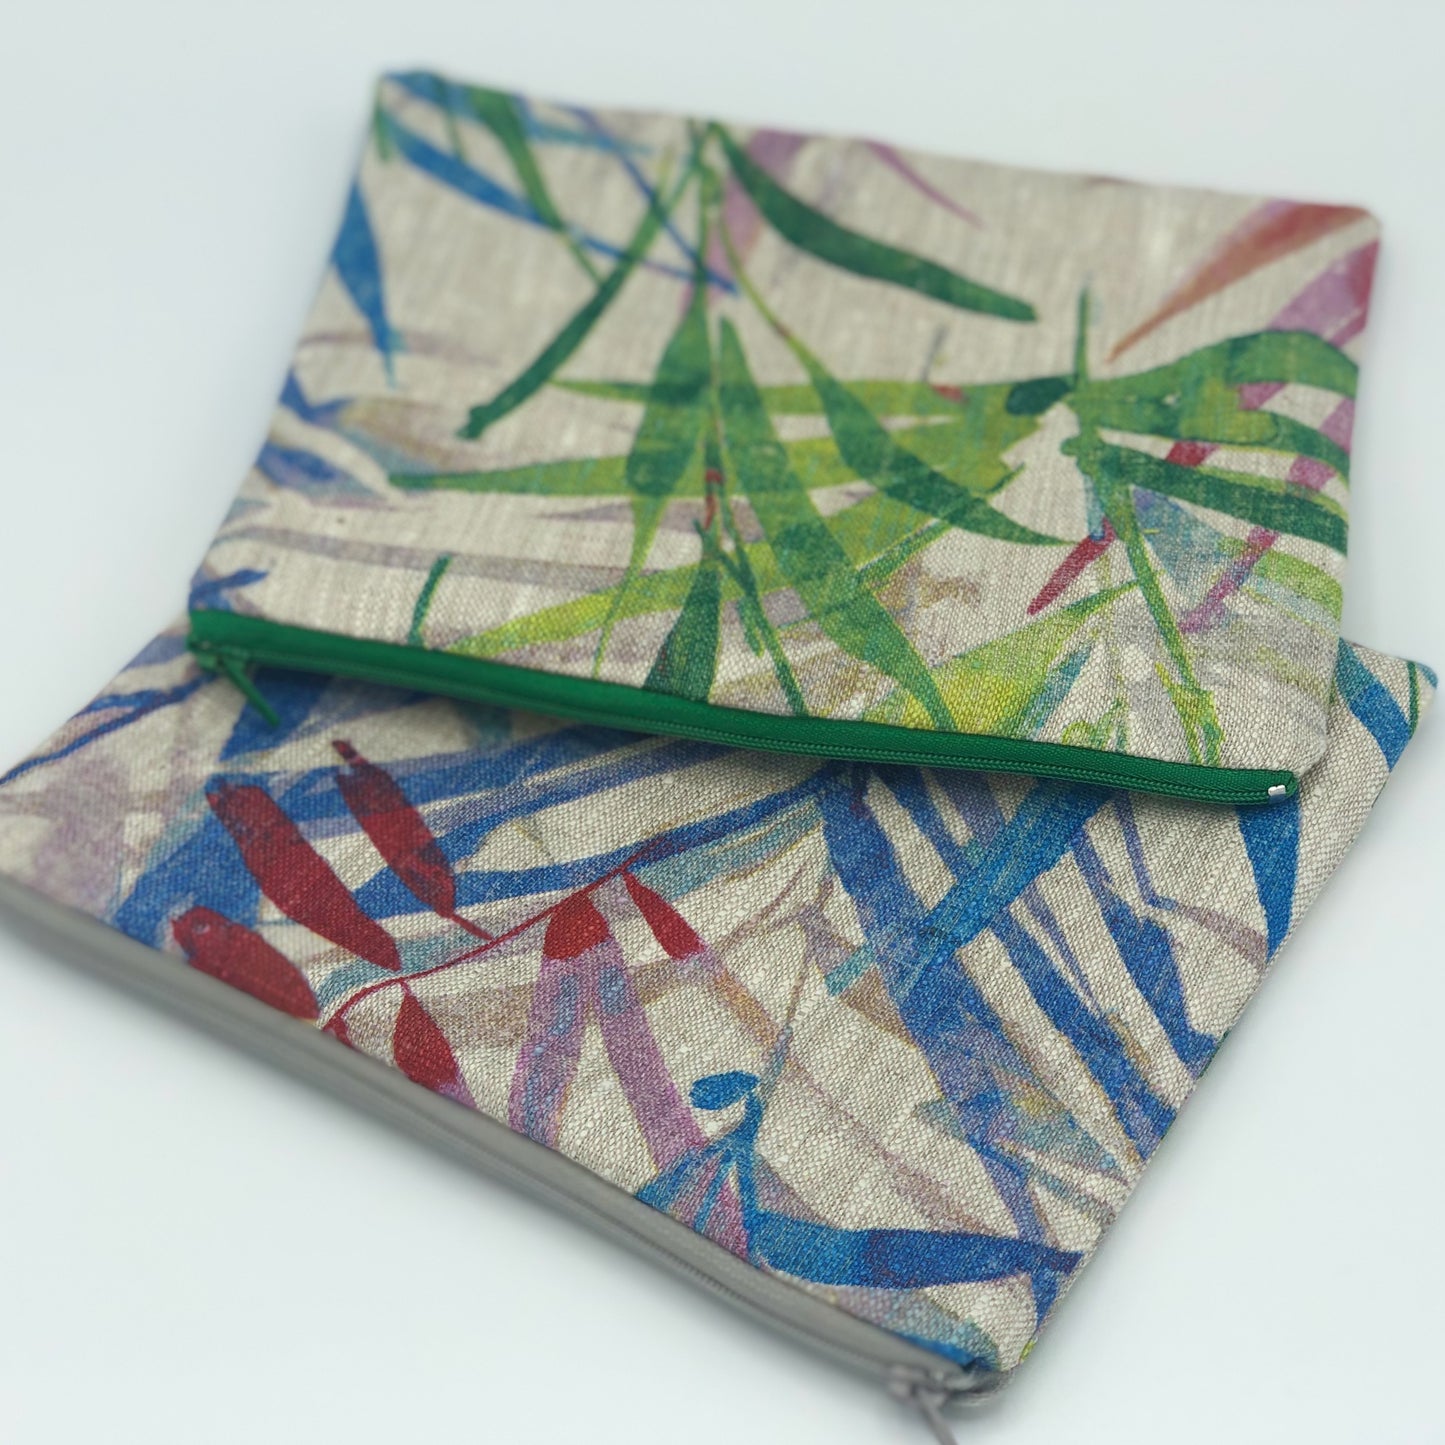 Linen Zipper Pouch with Beautiful Leaf Prints